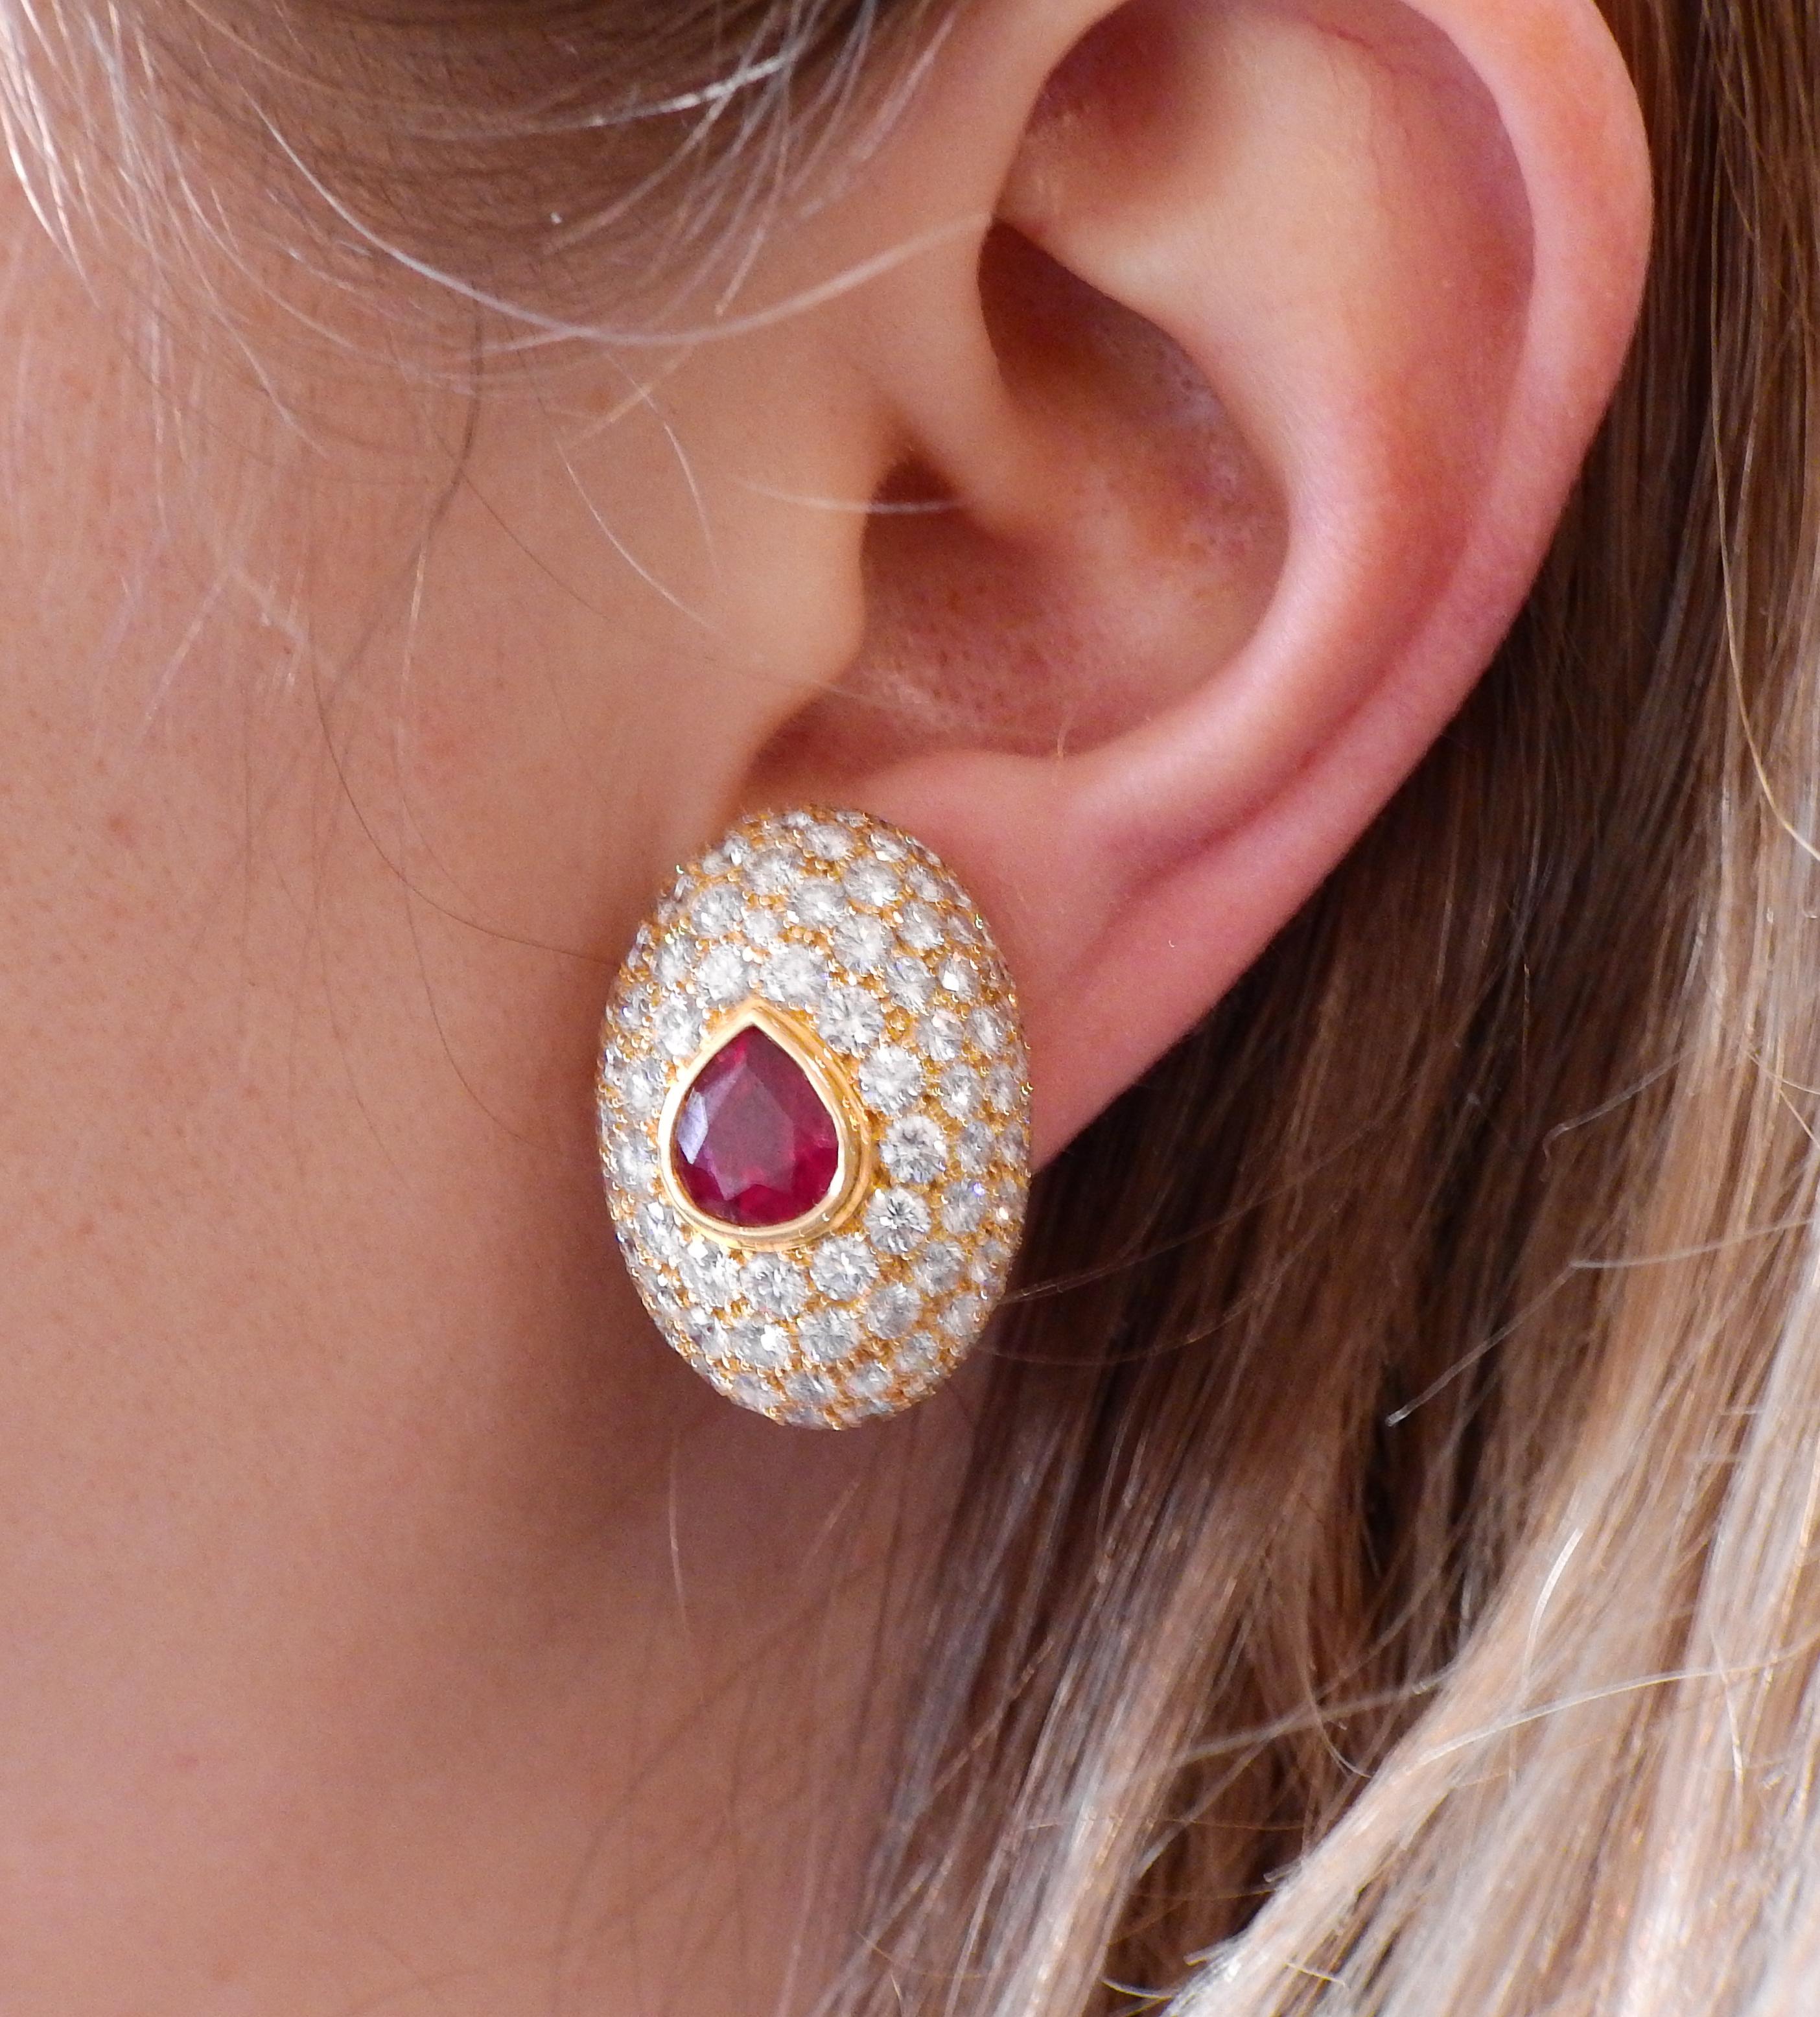 Hennell 15 Carat Diamond 6 Carat Ruby Gold Earrings In Excellent Condition For Sale In Lambertville, NJ